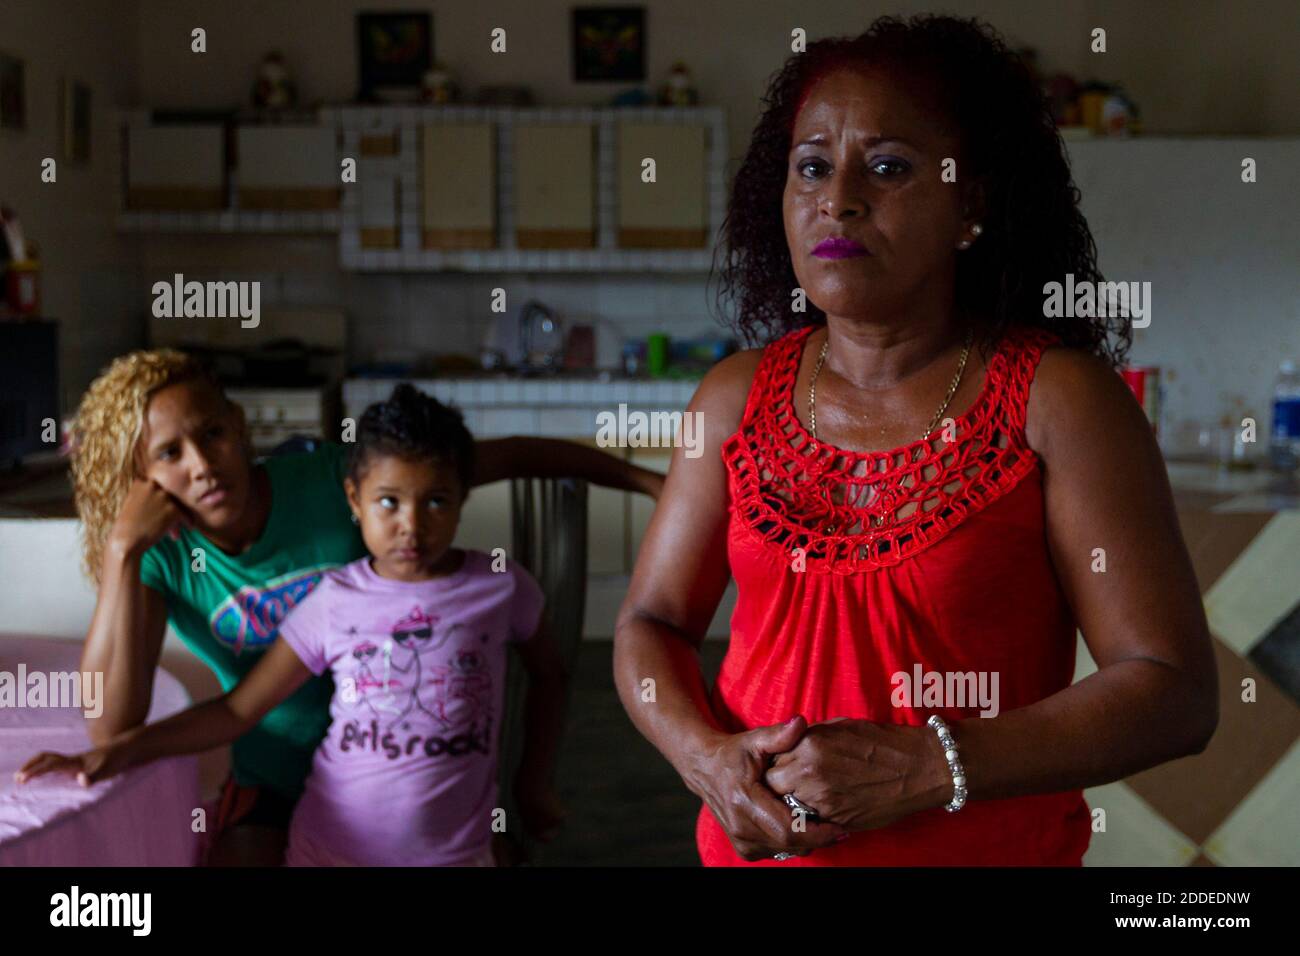 NO FILM, NO VIDEO, NO TV, NO DOCUMENTARY - Merry Perez Colon, 51, her daughter Yeisha Zayas Perez, 27, and her granddaughter, Nathanais Kamila Reyes Zayas, 5, live in a hurricane damaged home in the La Juncia community in Comerio, Puerto Rico on August 25, 2018. Perez Colon, whose husband is disabled, is repairing the home herself after the family was denied federal disaster aid. Photo by Matias J. Ocner/Miami Herald/TNS/ABACAPRESS.COM Stock Photo